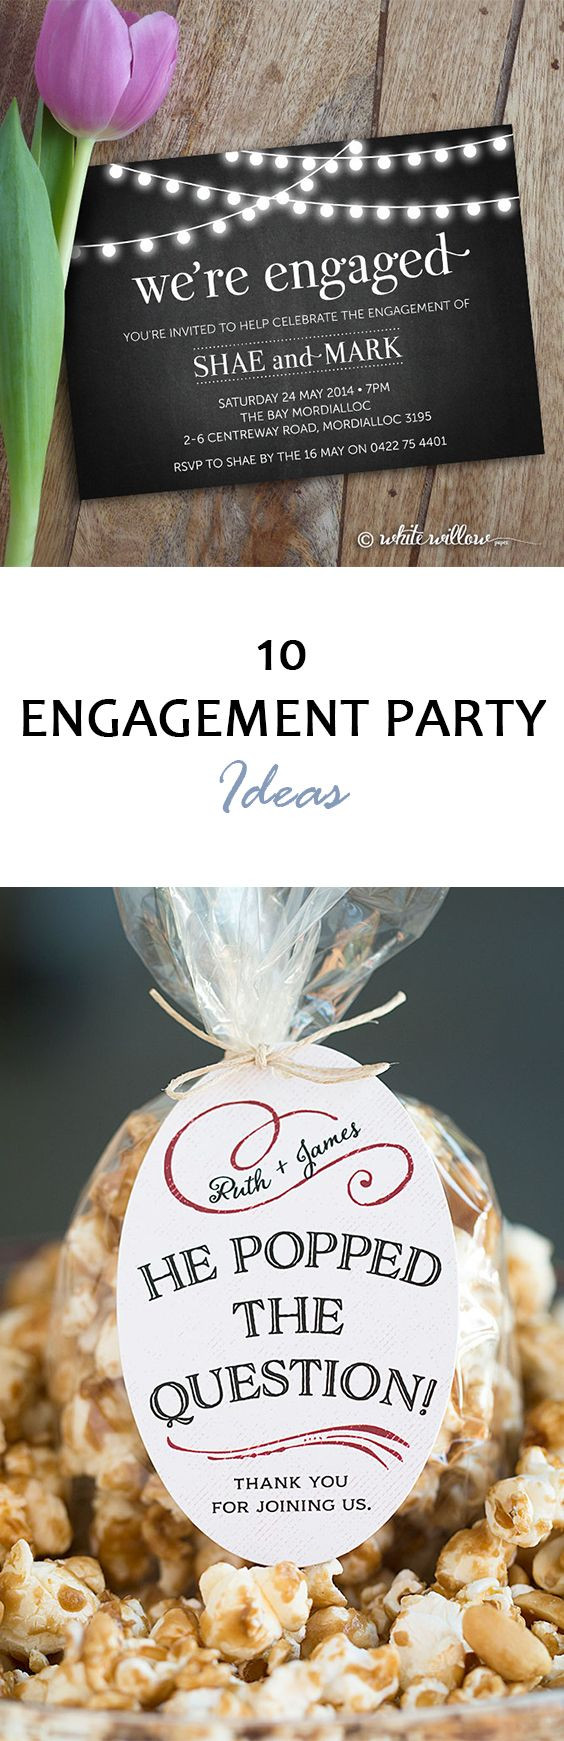 Gift Ideas For Engagement Party
 10 Engagement Party Ideas Oh My Veil